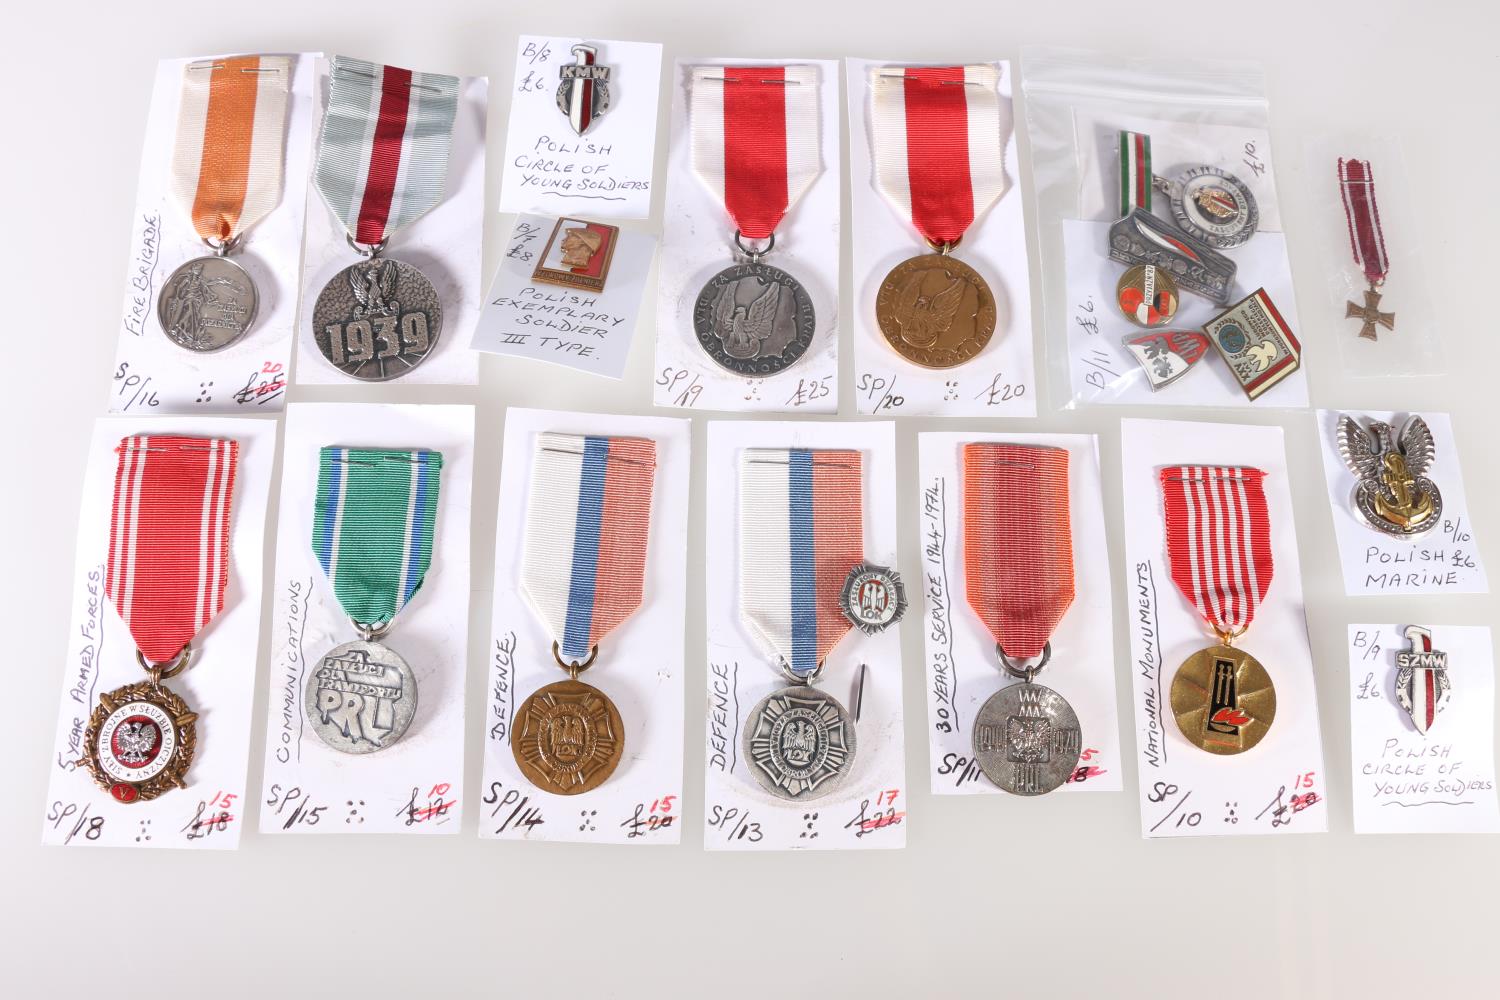 POLAND. Polish medals including Medal of Merit for Safe Guarding National Monuments, 30years Service